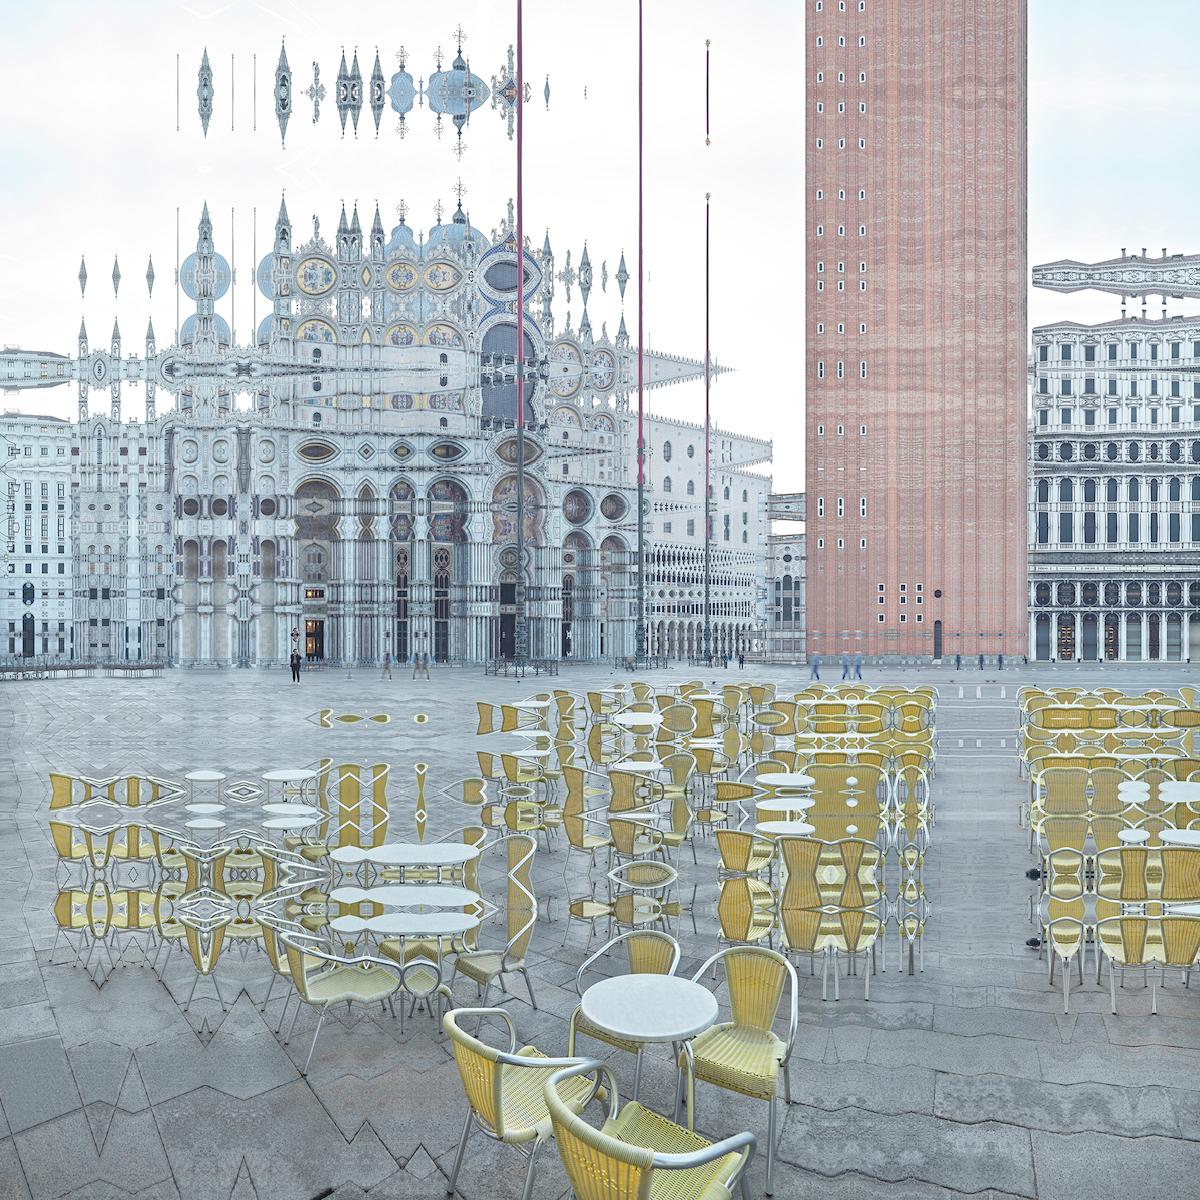 "Good Morning San Marco - Venise #36", photography by Didier Fournet.

Didier Fournet is a contemporary "painter" thanks to photography: he chose pixels instead of brushes and reveals the beauty of the world by turning landscapes into